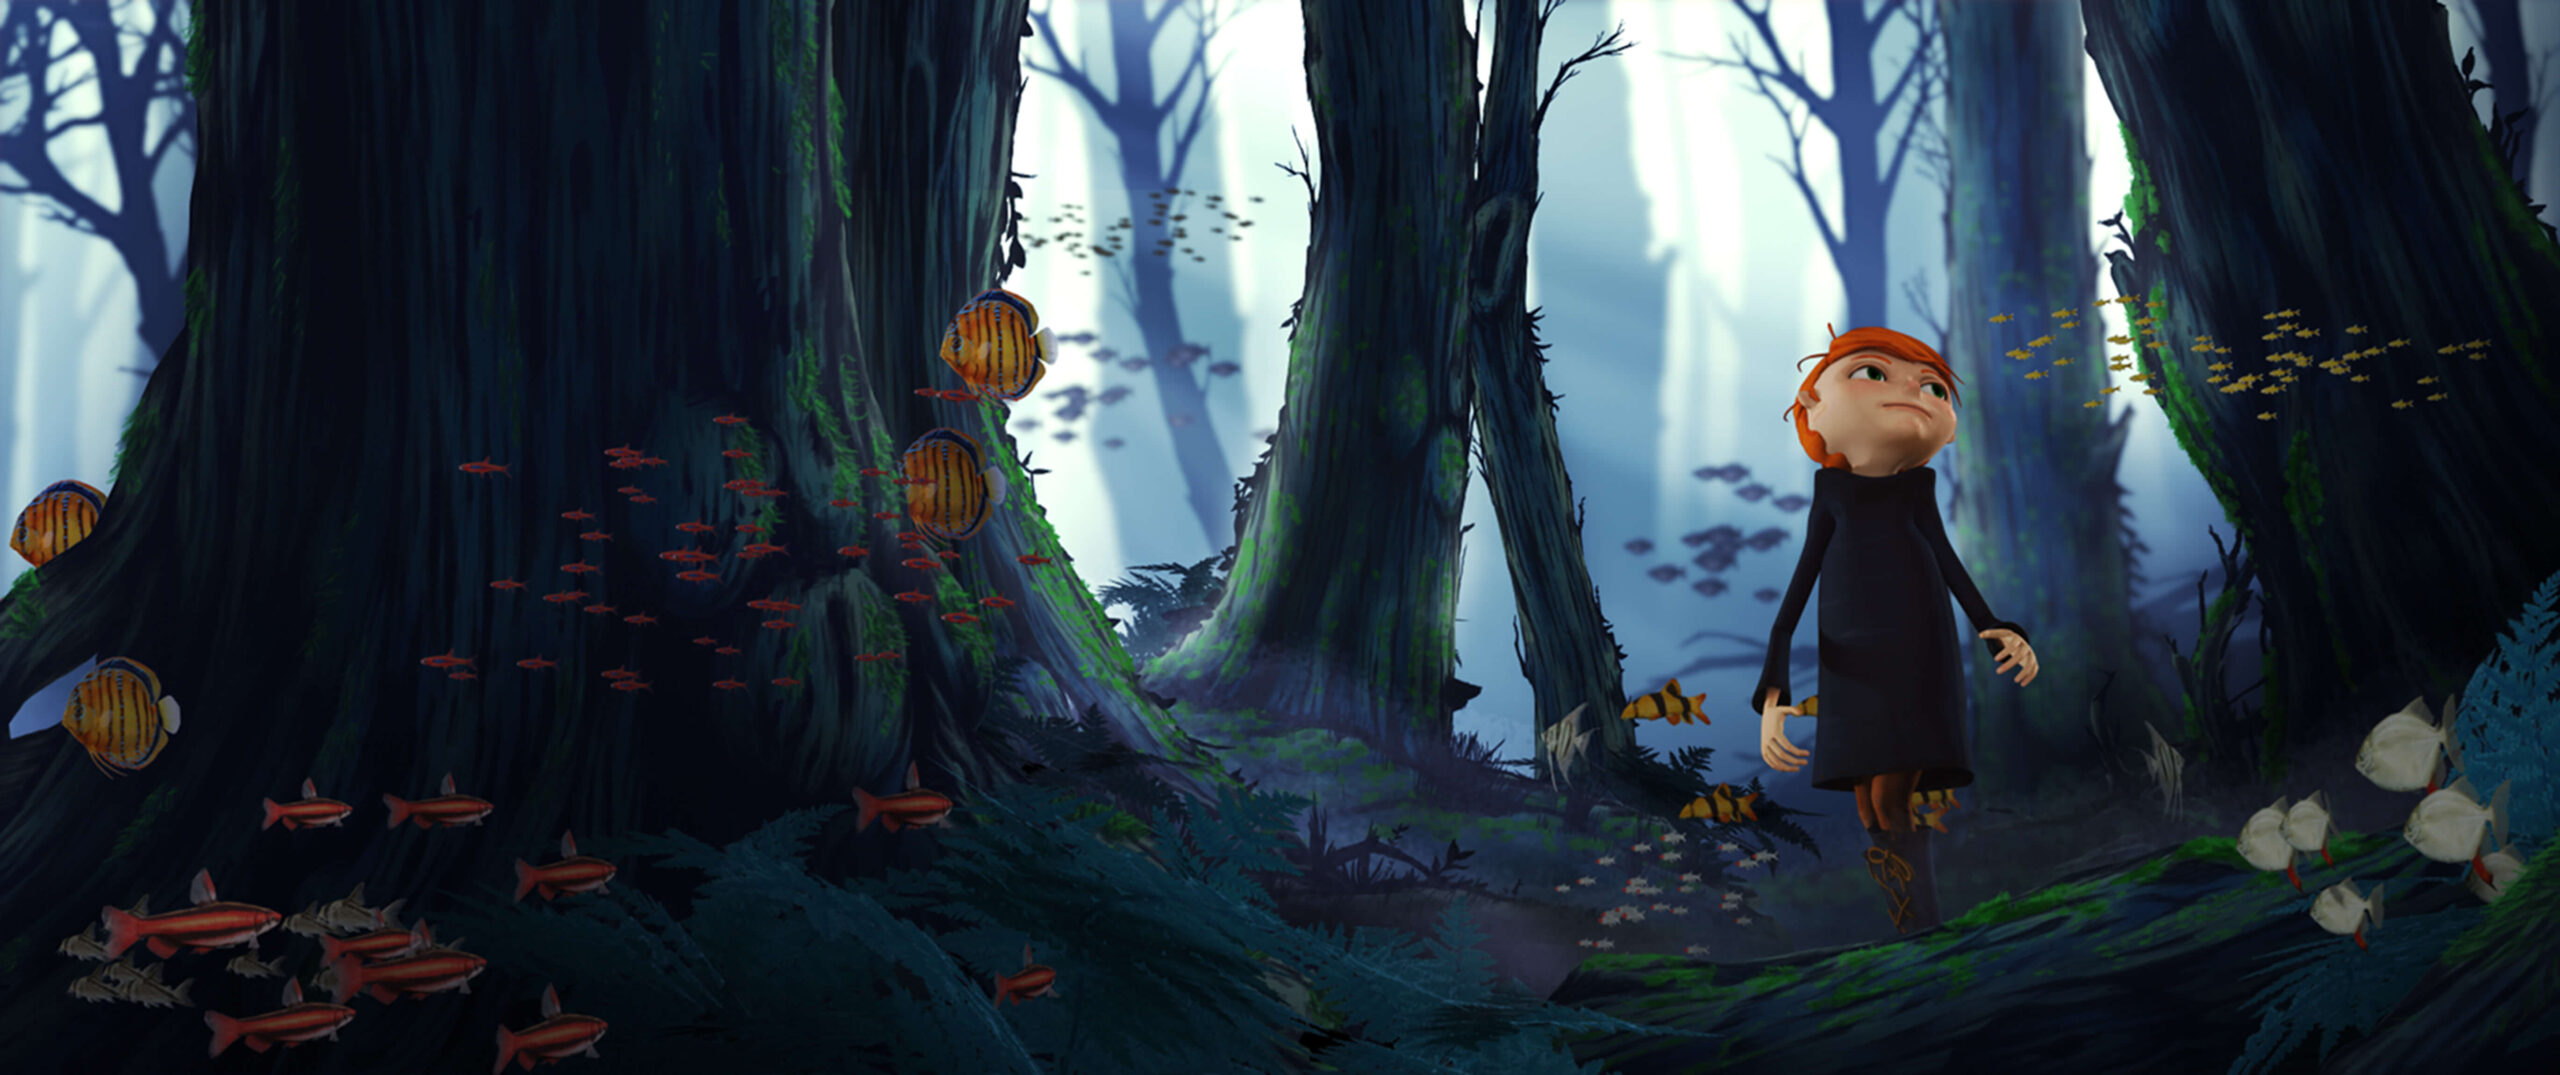 A 3D render of a boy in a dark forest. There are mushroom and moss growing on the forest floor and there is fog amongst the trees.